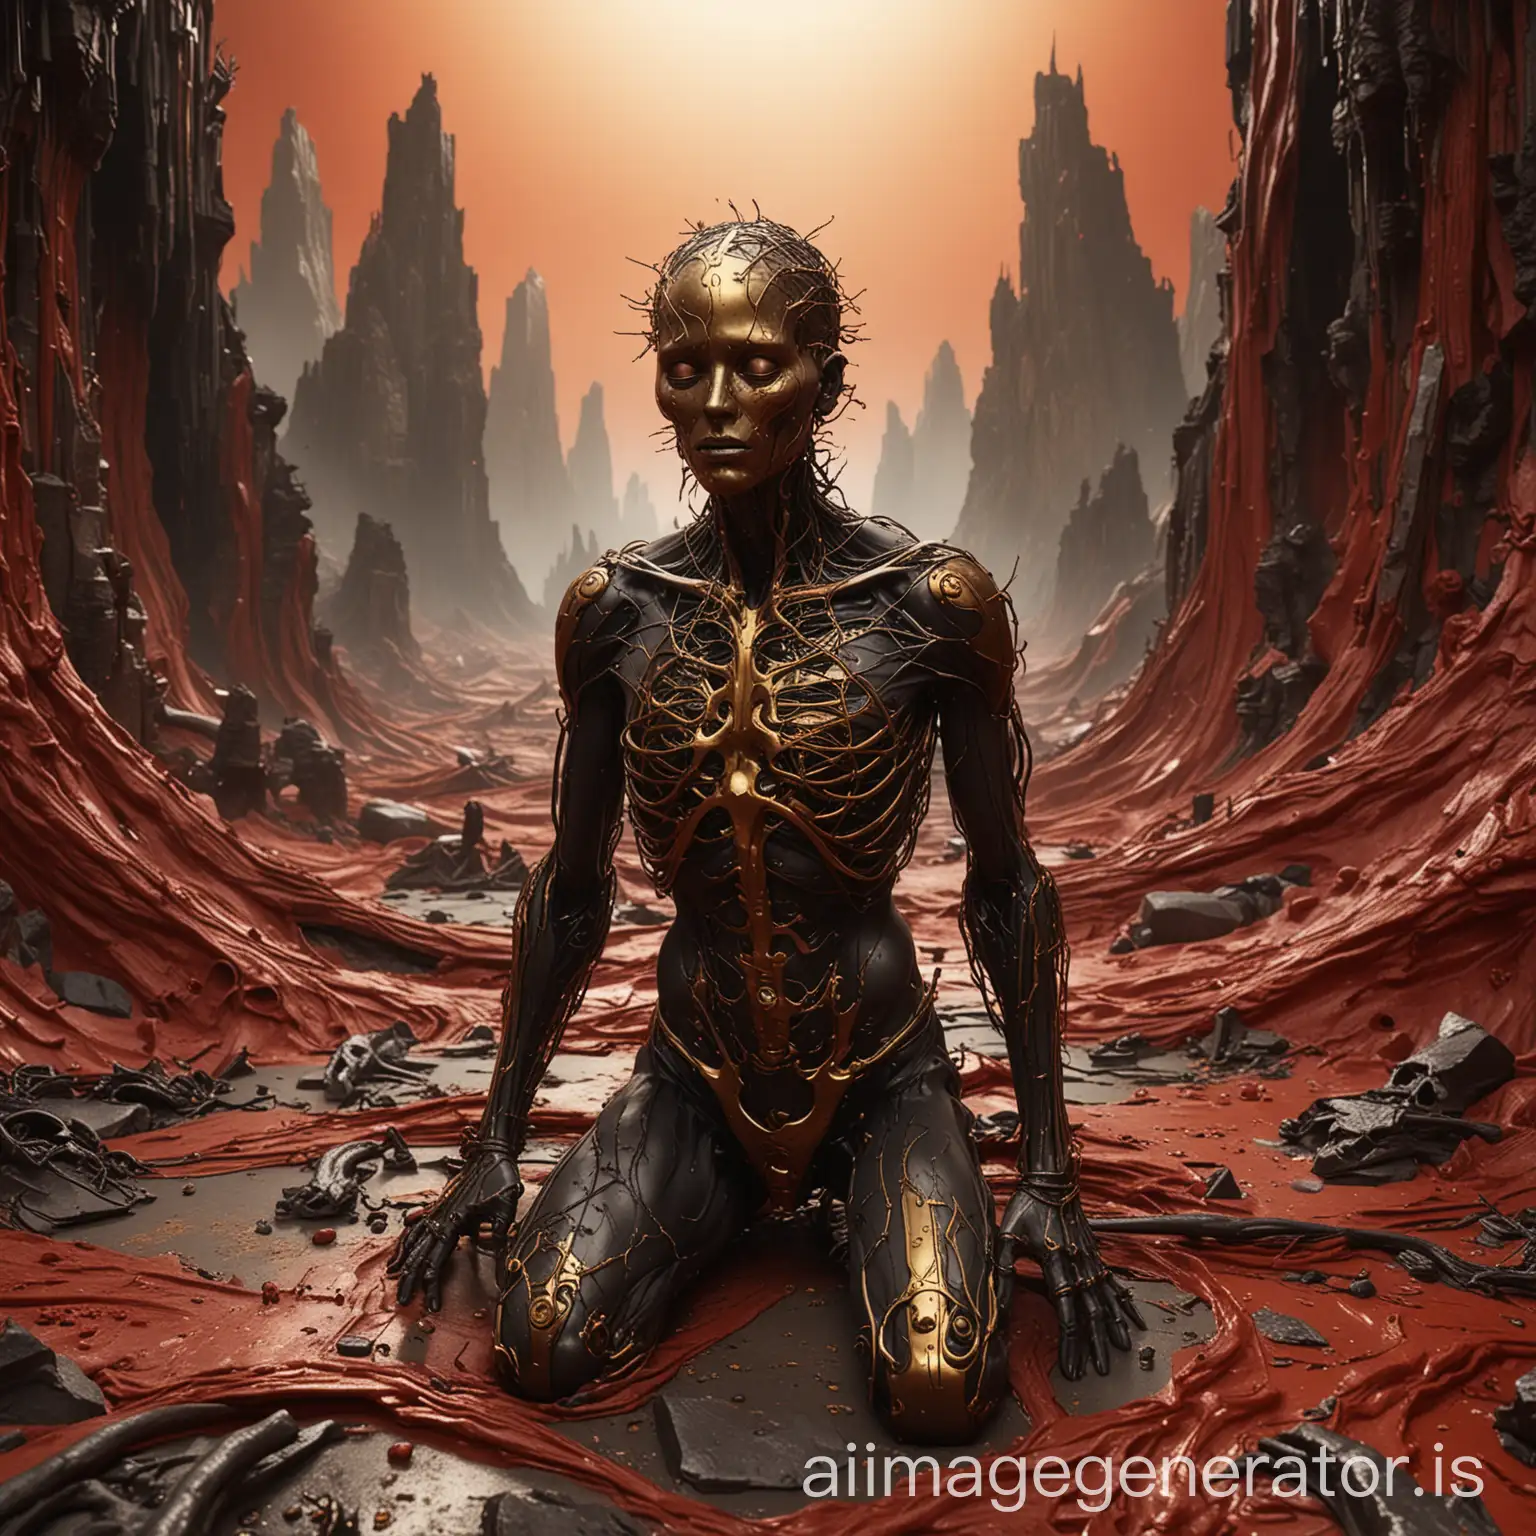 close-up,the composition features a figure shrouded in gold and black, surrounded by a surreal and grotesque landscape, the figure appears to be struggling, with biomechanical structures entwined around its body, symbolizing depression, panic attacks, loneliness, and fear, the background is a mix of red tones and ash colors, adding to the overall sense of despair and dread,Ray Tracing Global Illumination,Optics, Scattering,Glow,insanely detailed and intricate,superdetailed